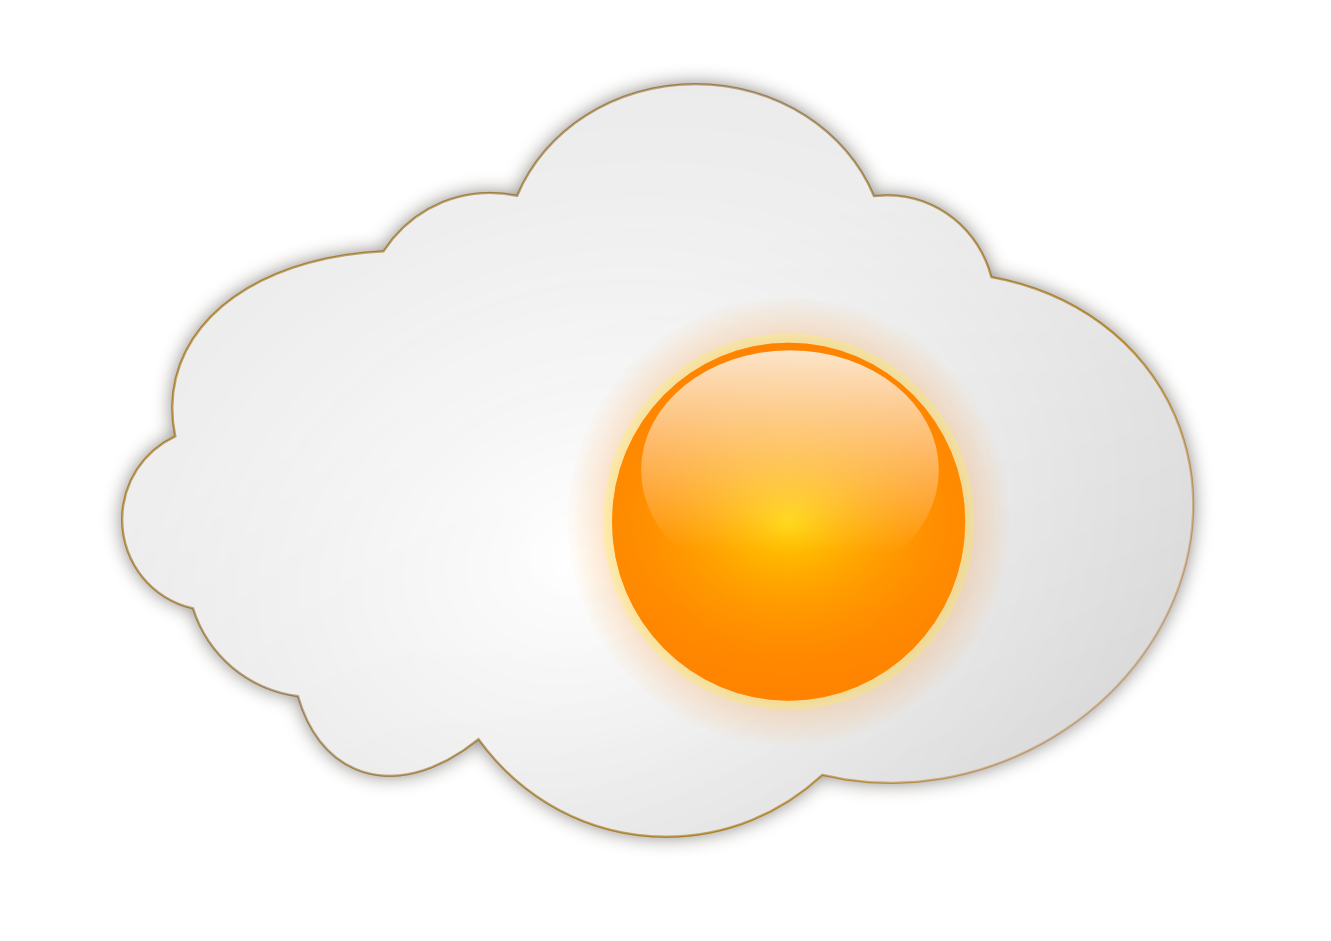 eggs clipart cooked egg